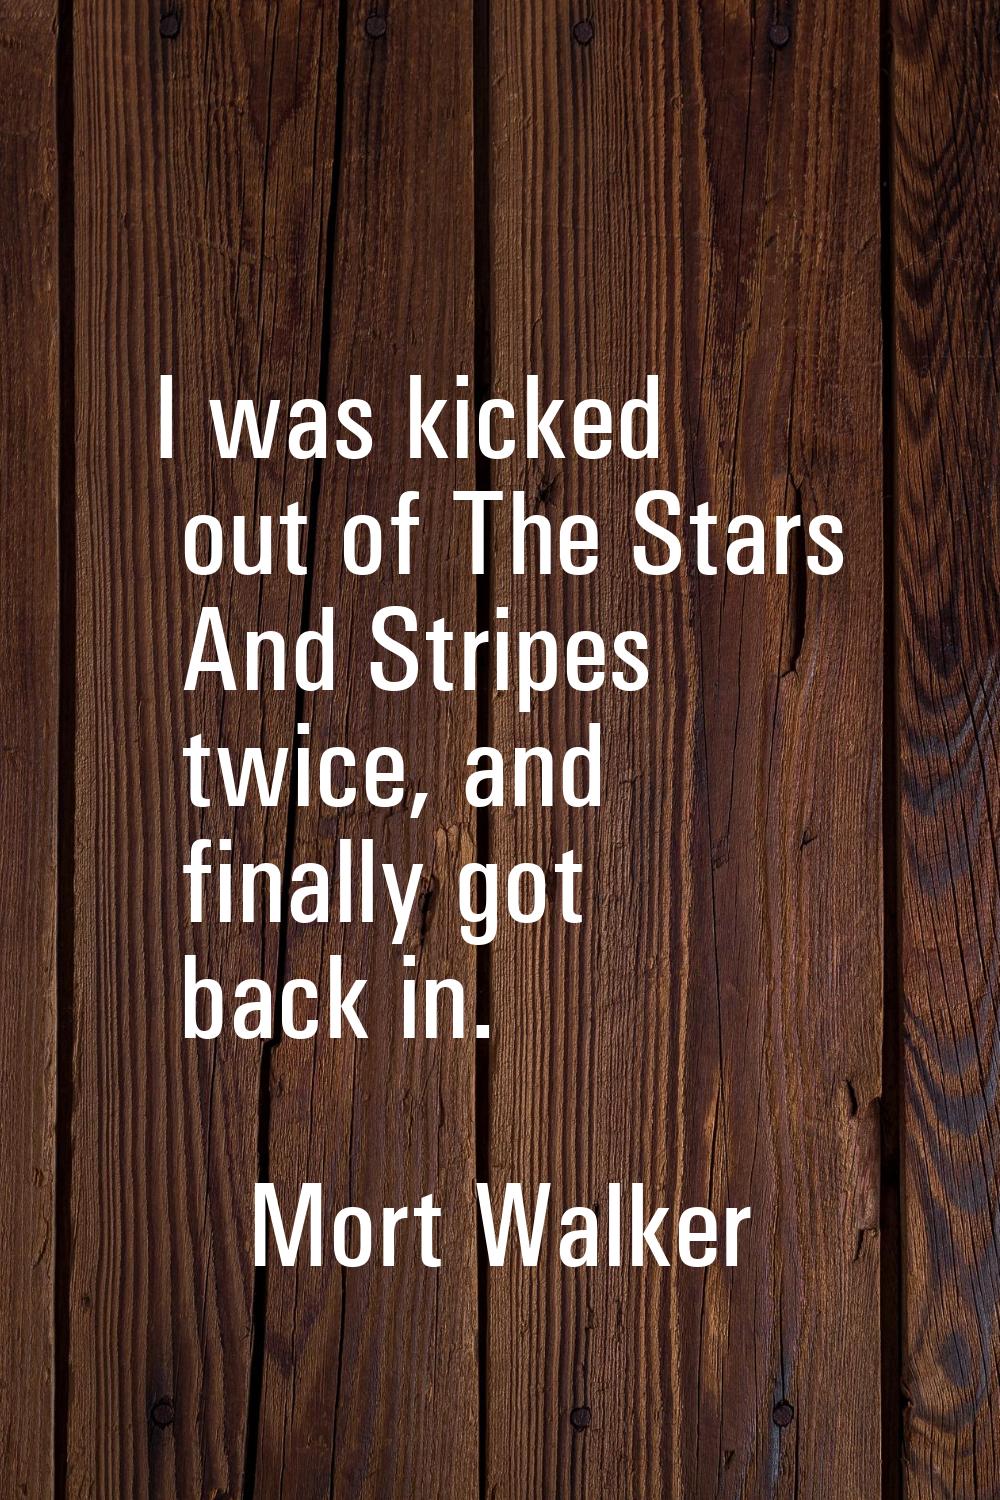 I was kicked out of The Stars And Stripes twice, and finally got back in.